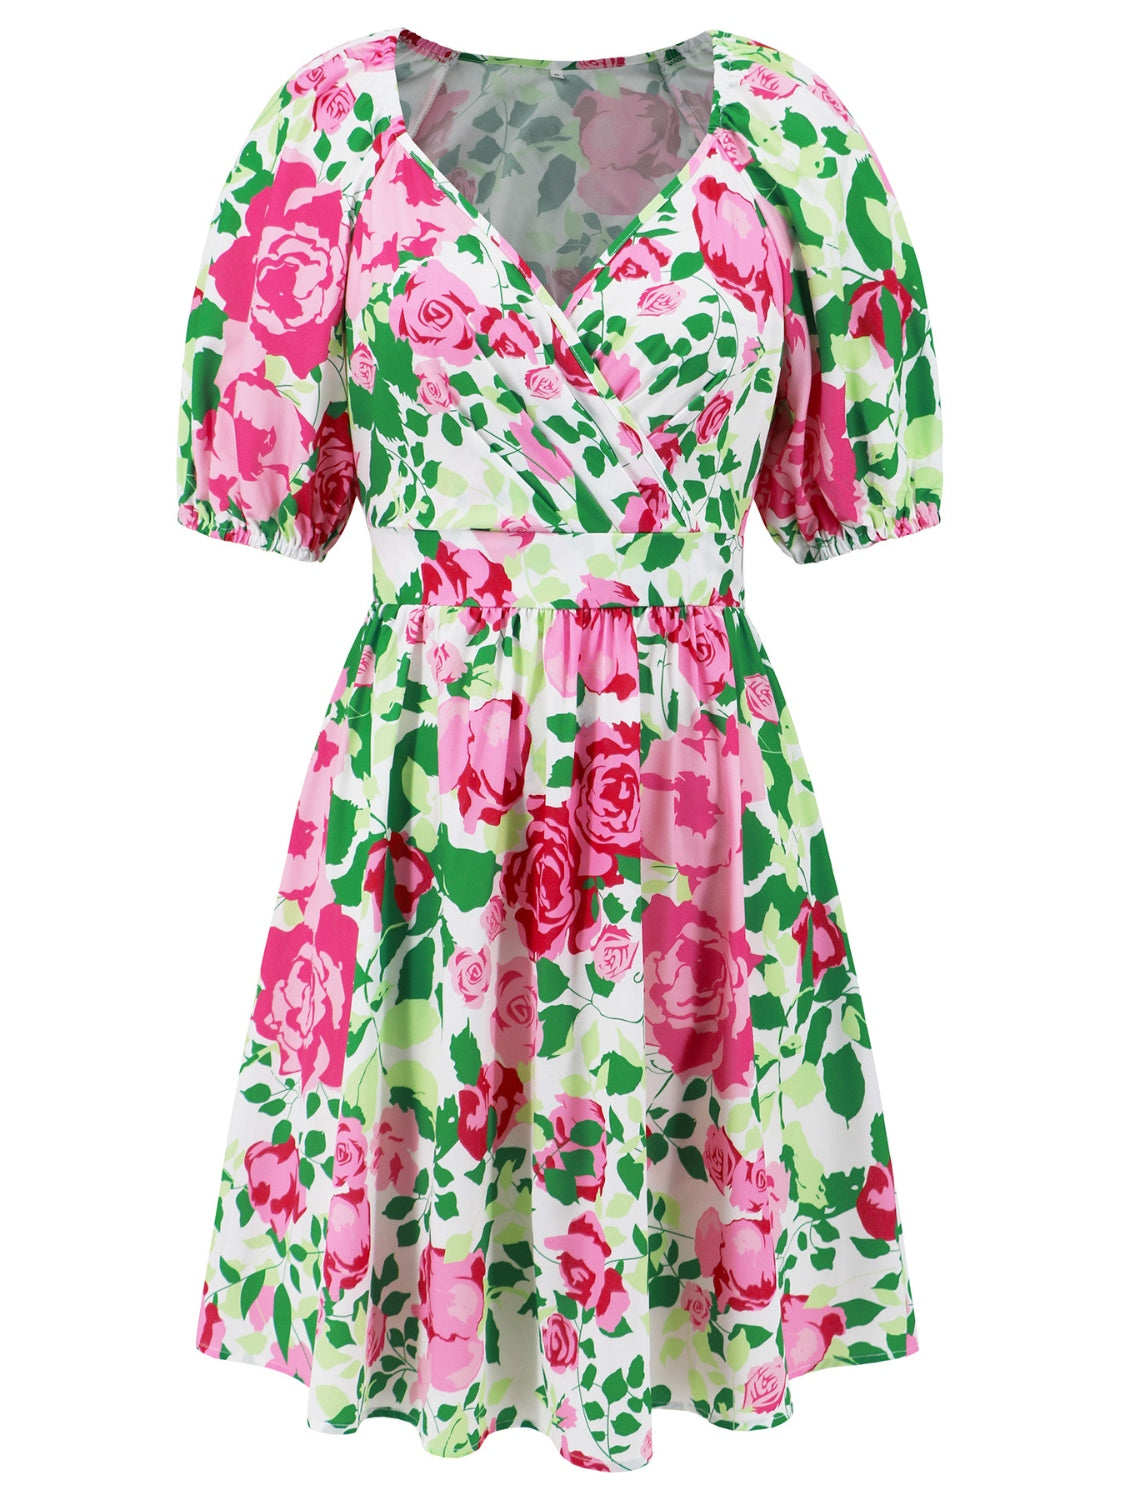 Woman wearing a vibrant floral summer surplice dress in tangerine, perfect for casual summer outings.